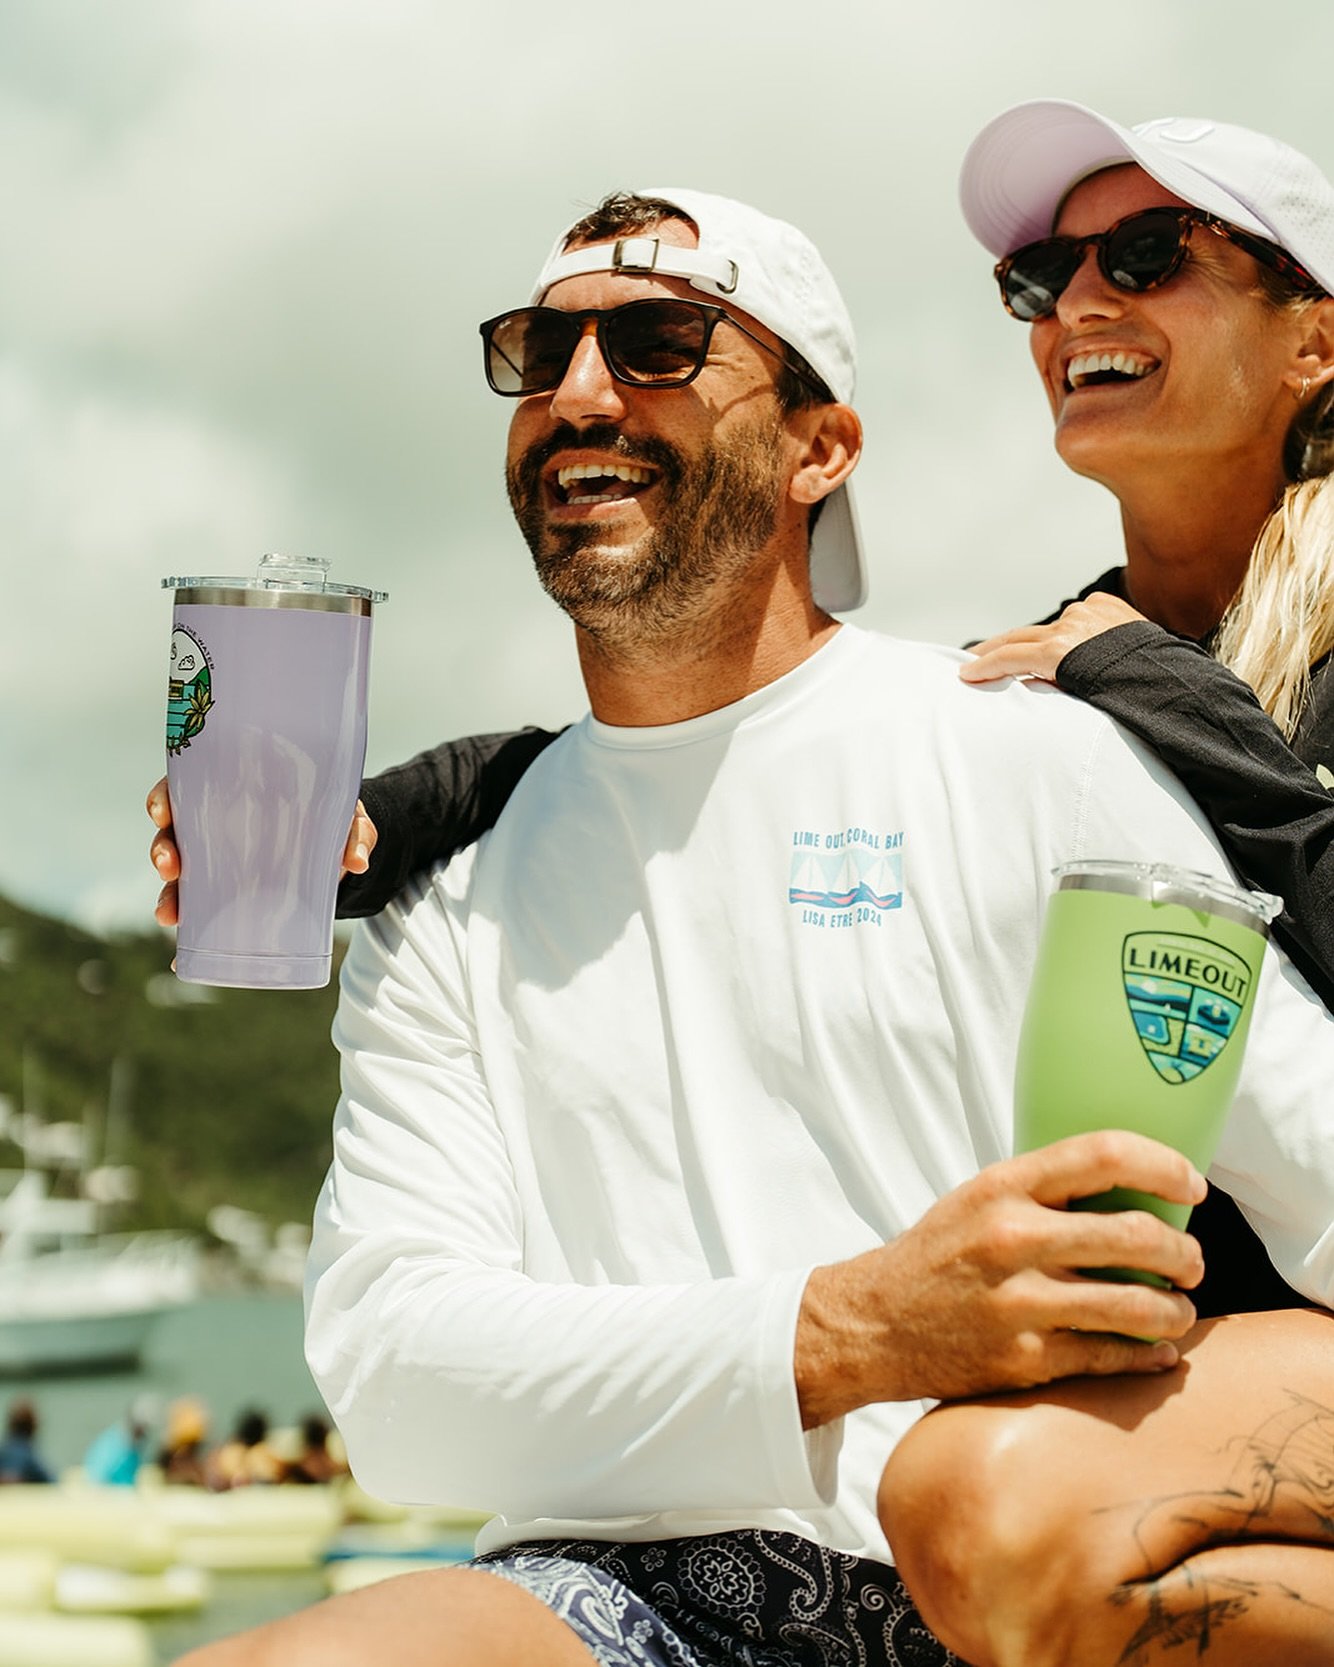 ORCA 27oz Chaser- The perfect boating accessory! Shop now at Limeoutvi.com/shop ! ∕∕∕ OPEN Sunday - Friday &bull; 11:00am - 5:00pm [closed Saturday] 📸: @sarahbswan 
.
. 
. 
#LimeOut #LimeOutVi #CocktailsAndTacos #CoralBay #StJohn #USVirginIslands #U